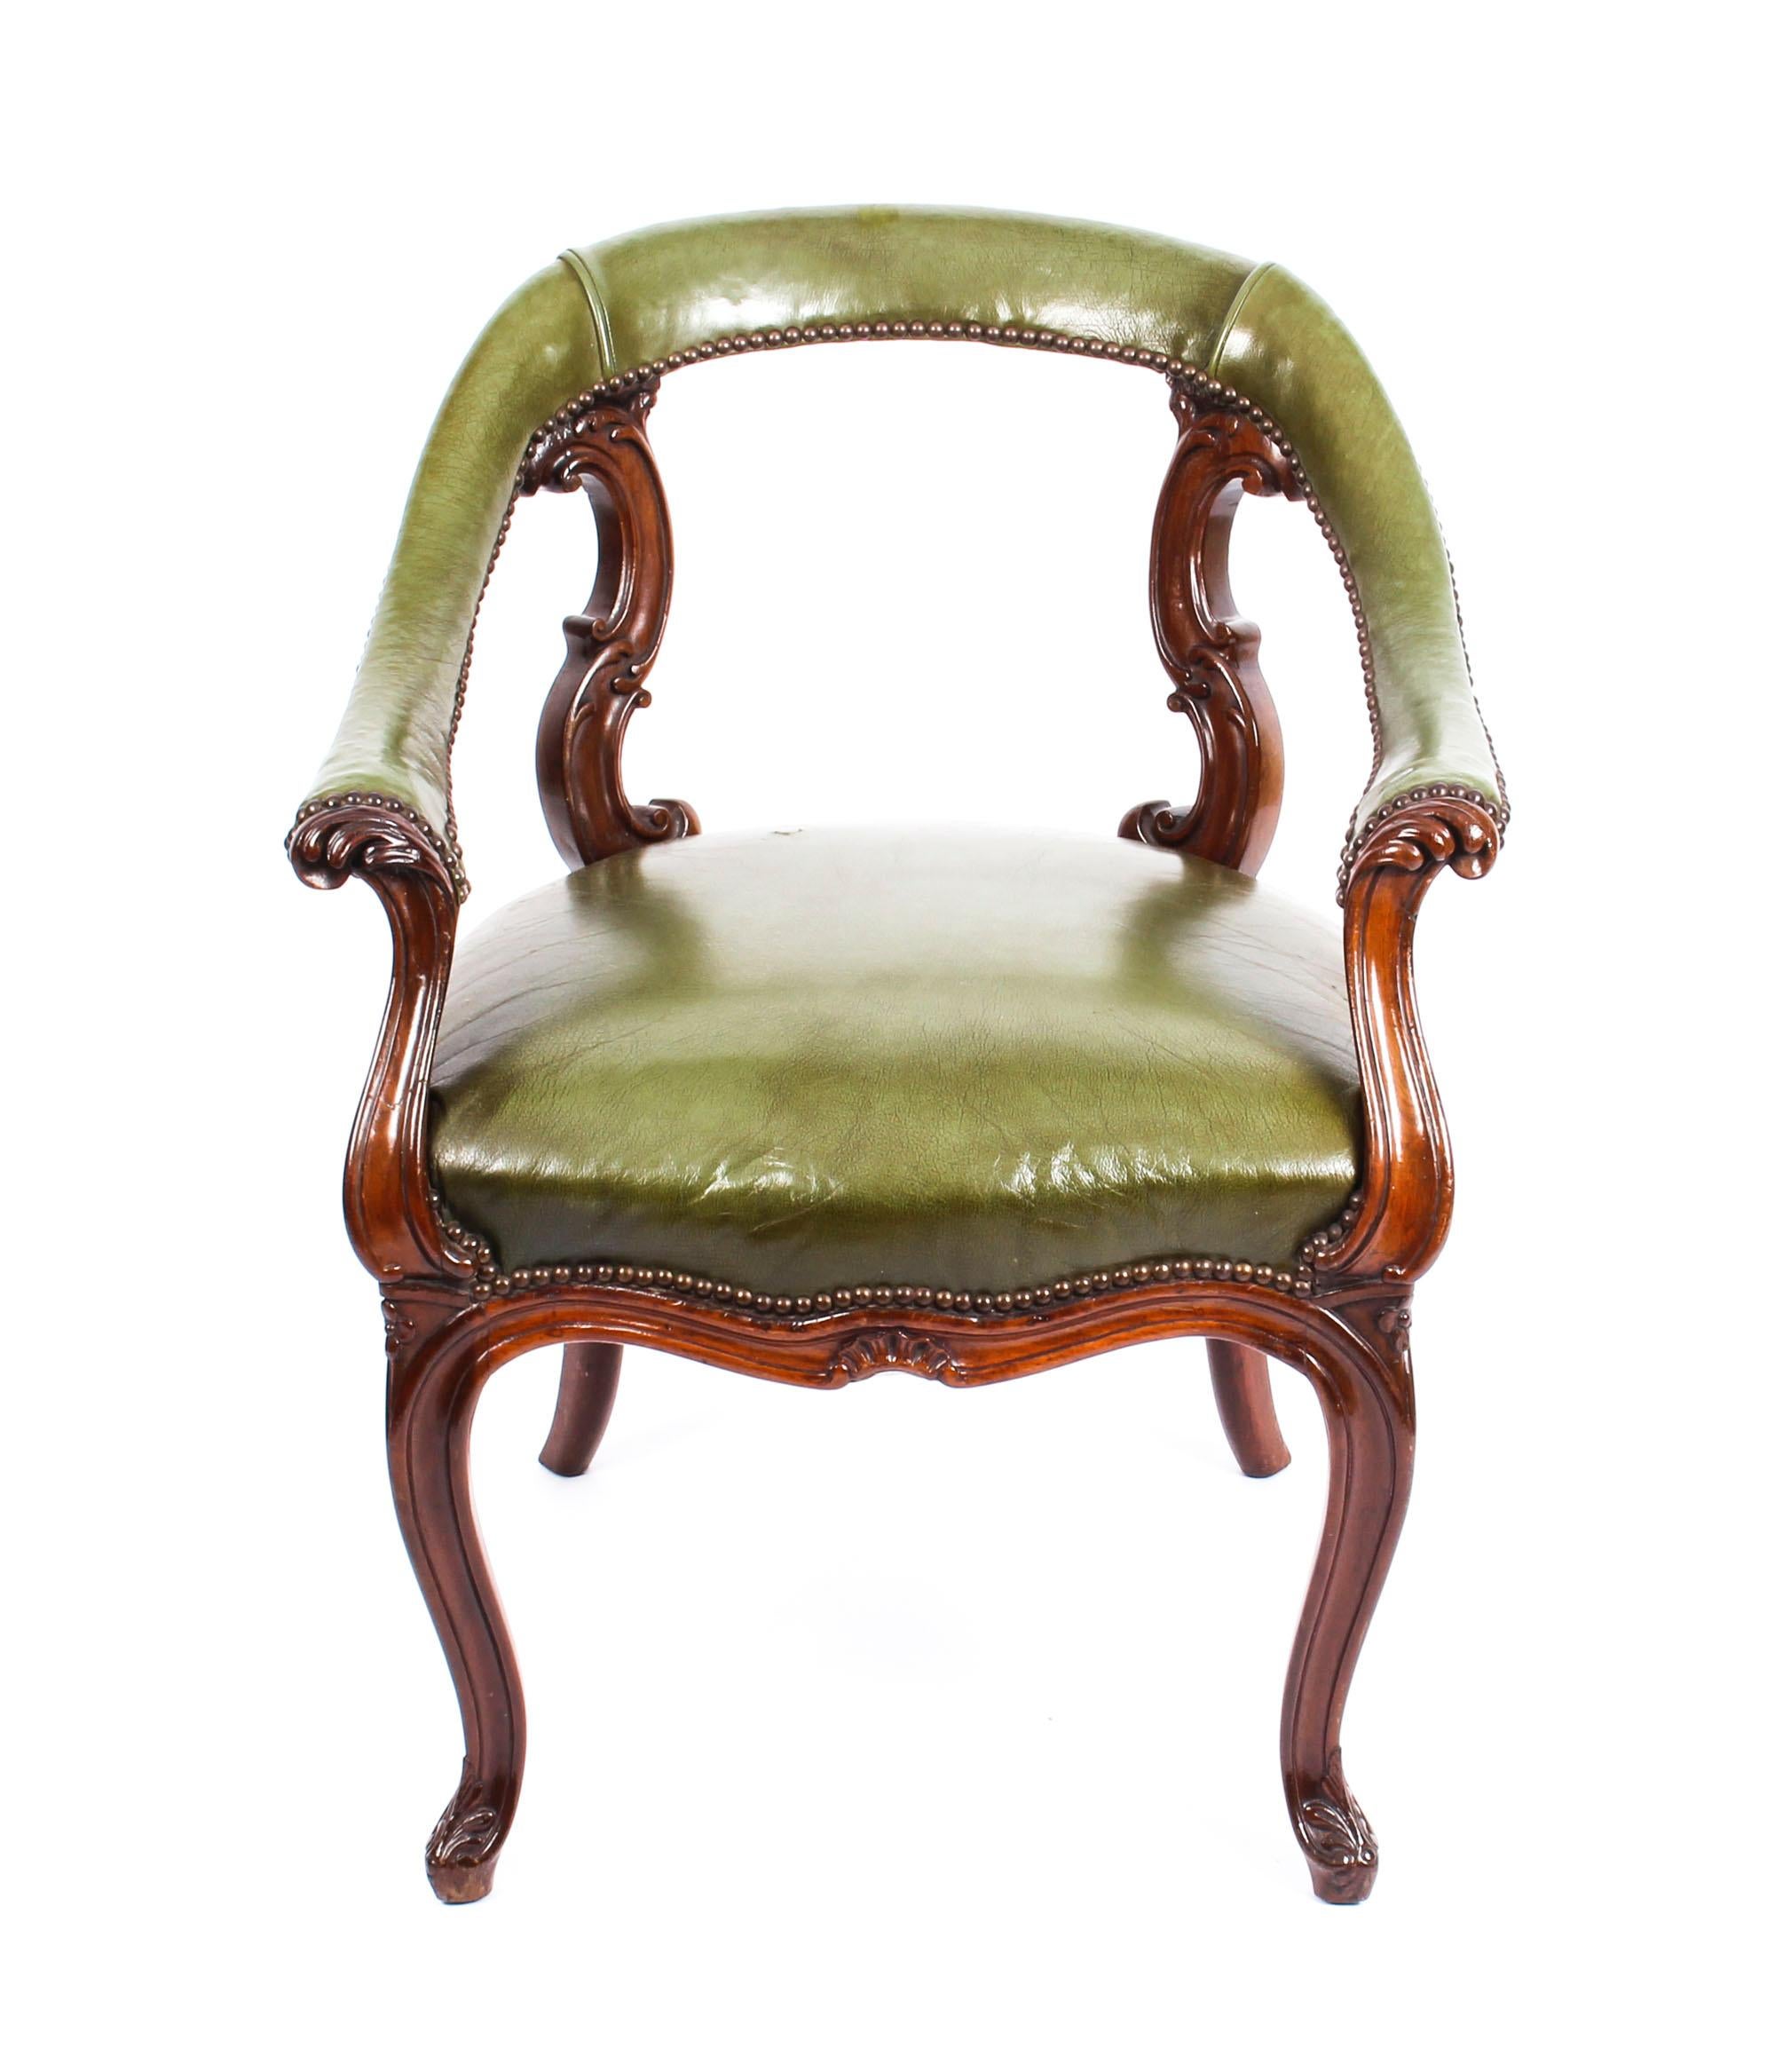 This is an impressive antique Victorian mahogany library chair, circa 1860 in date.

This sturdy and very refined elbow chair is upholstered in beautiful green leather and is exquisitely studded.
 
It features an attractive moulded scrolling